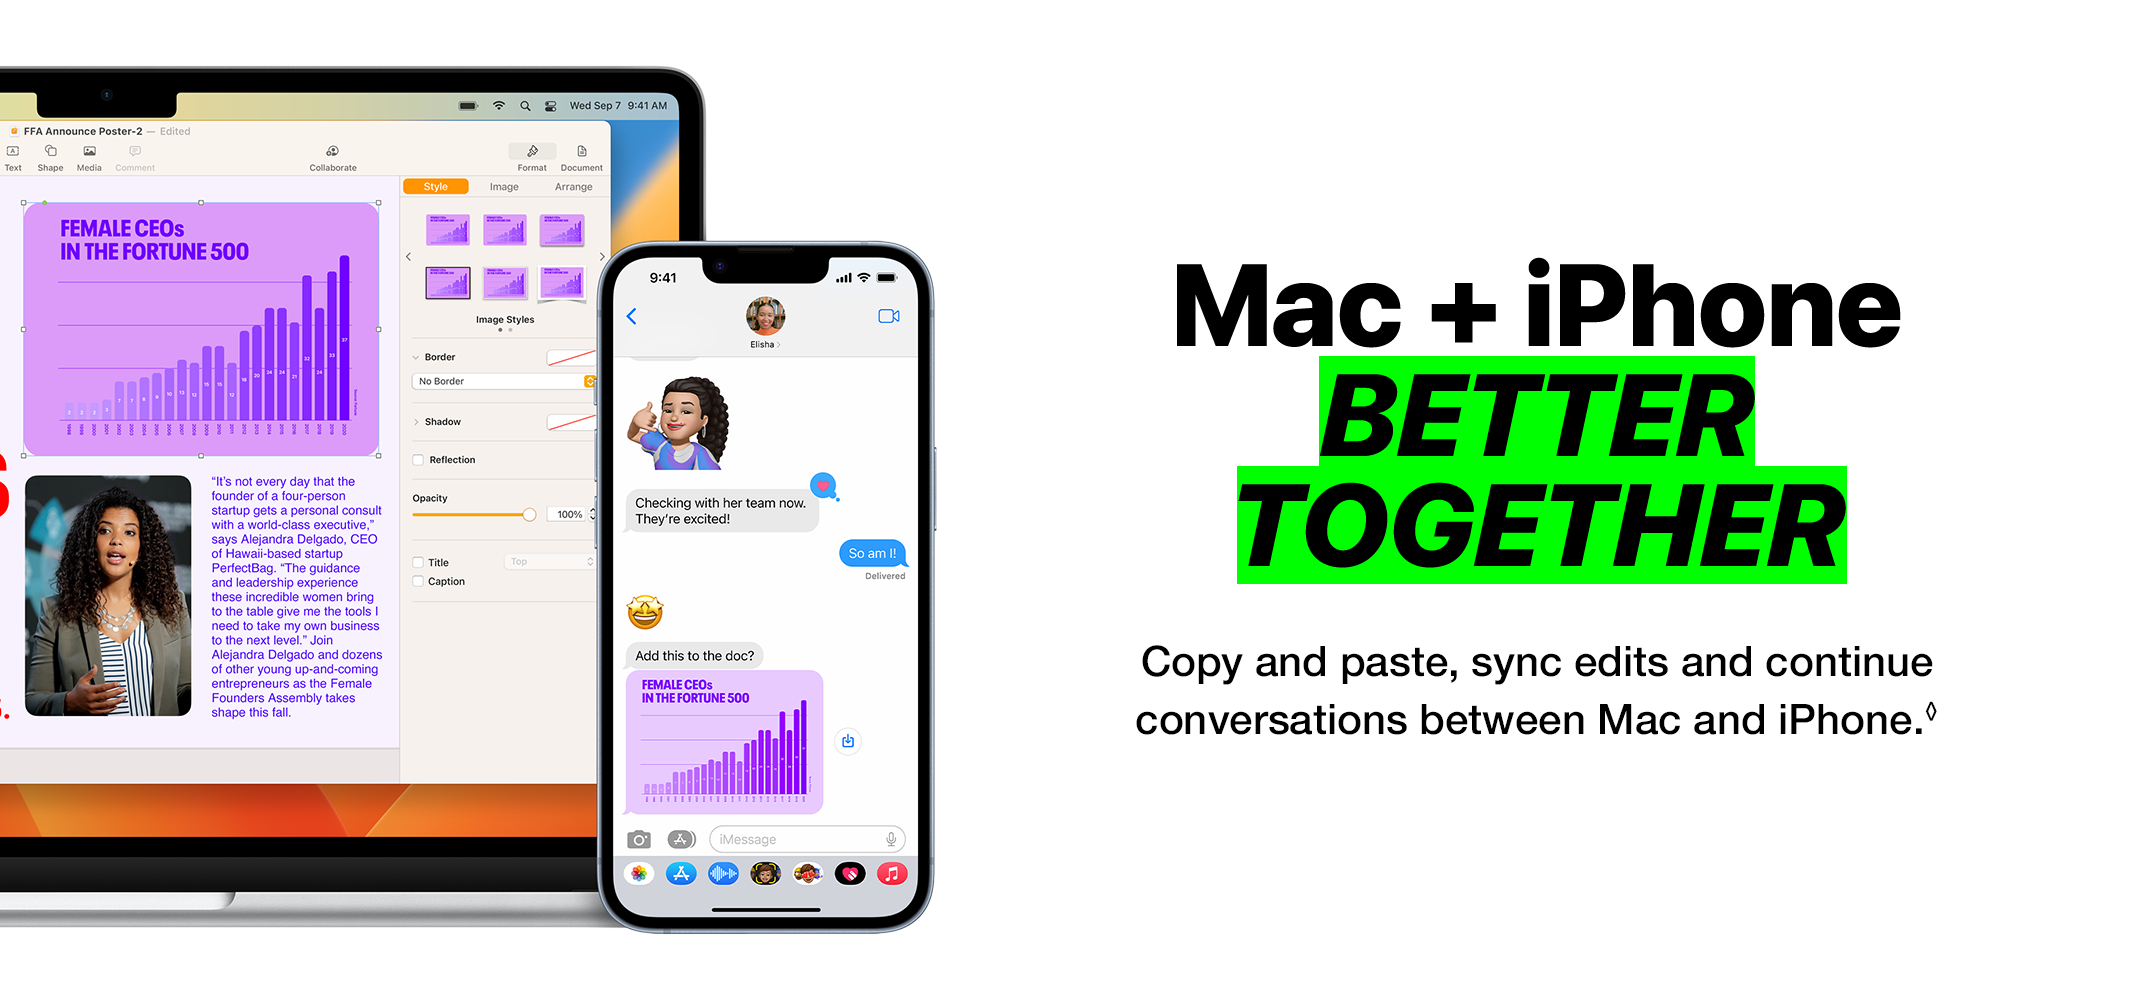 Mac + iPhone BETTER TOGETHER